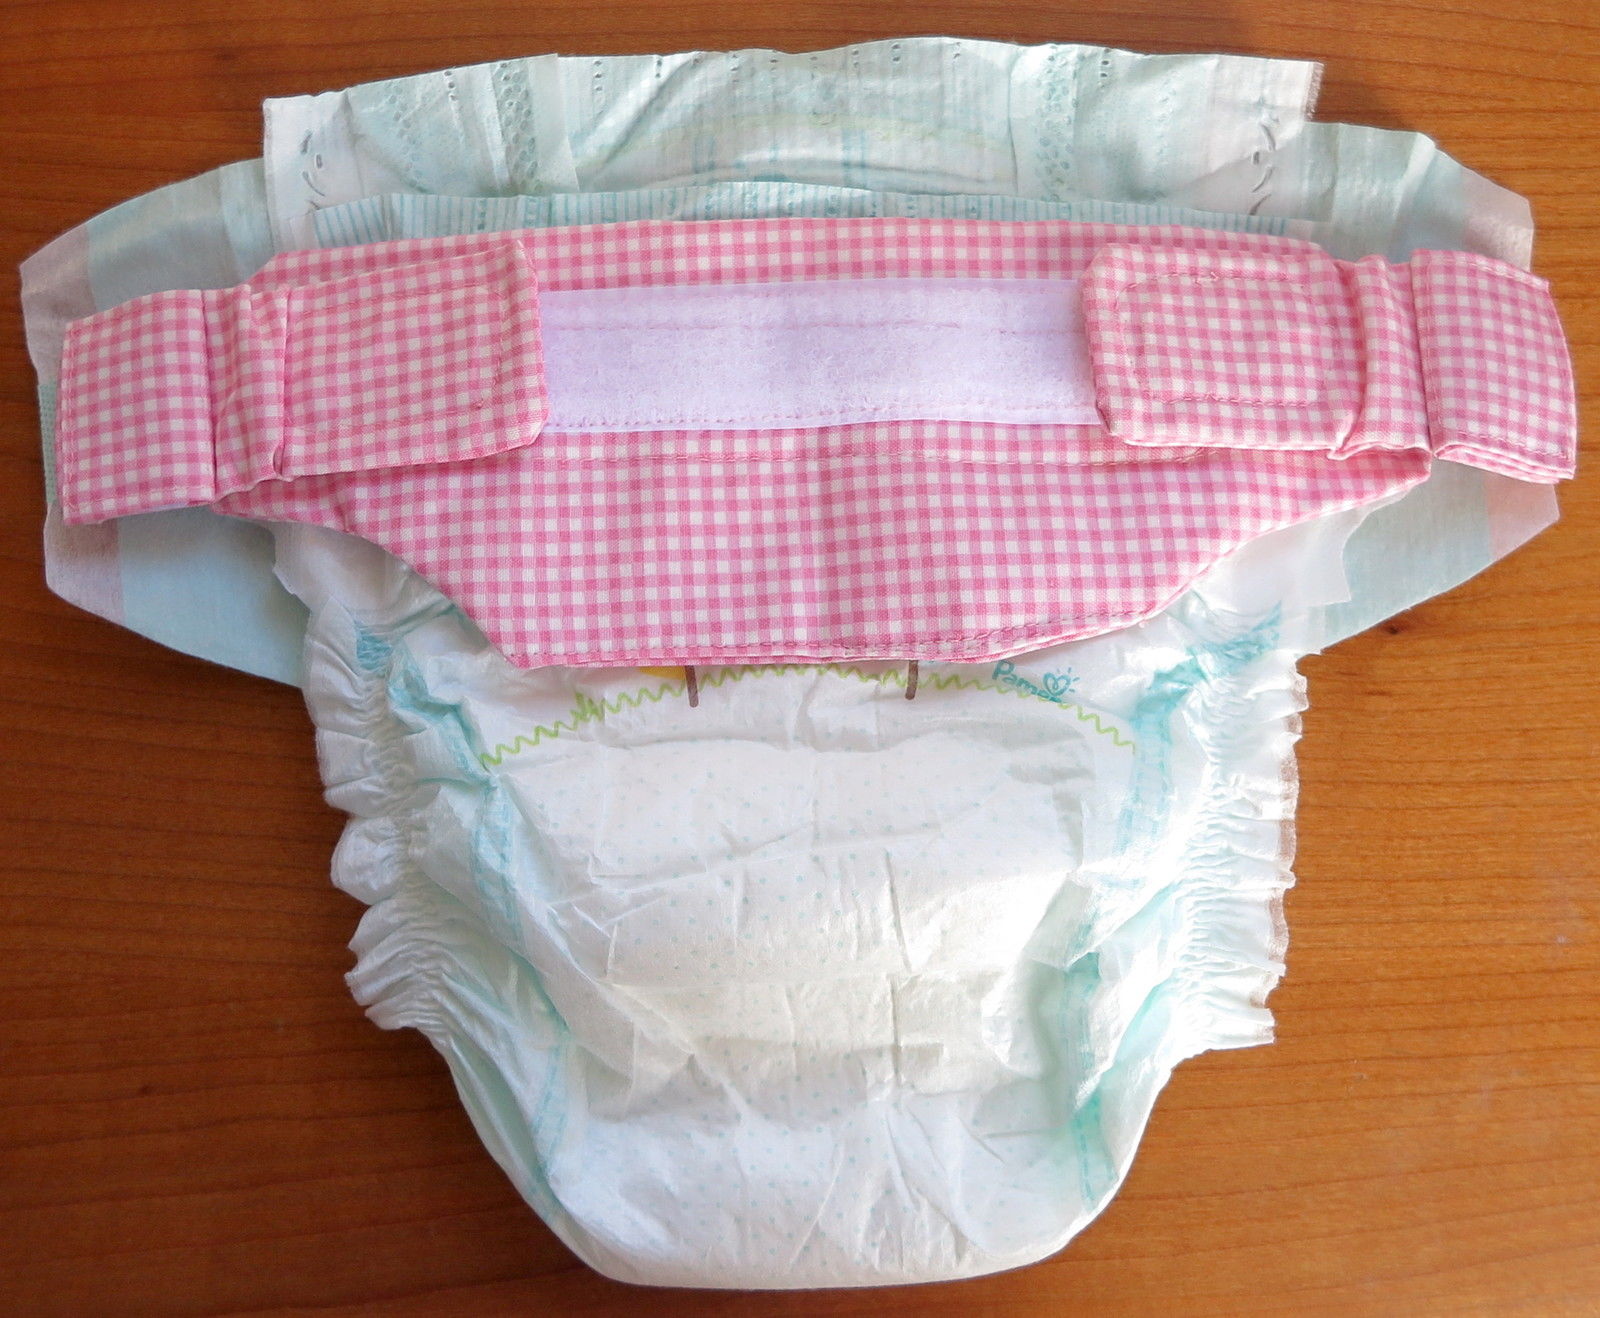 BNWT Baby girl toddler bloomers nappy cover underwear XL 18 months